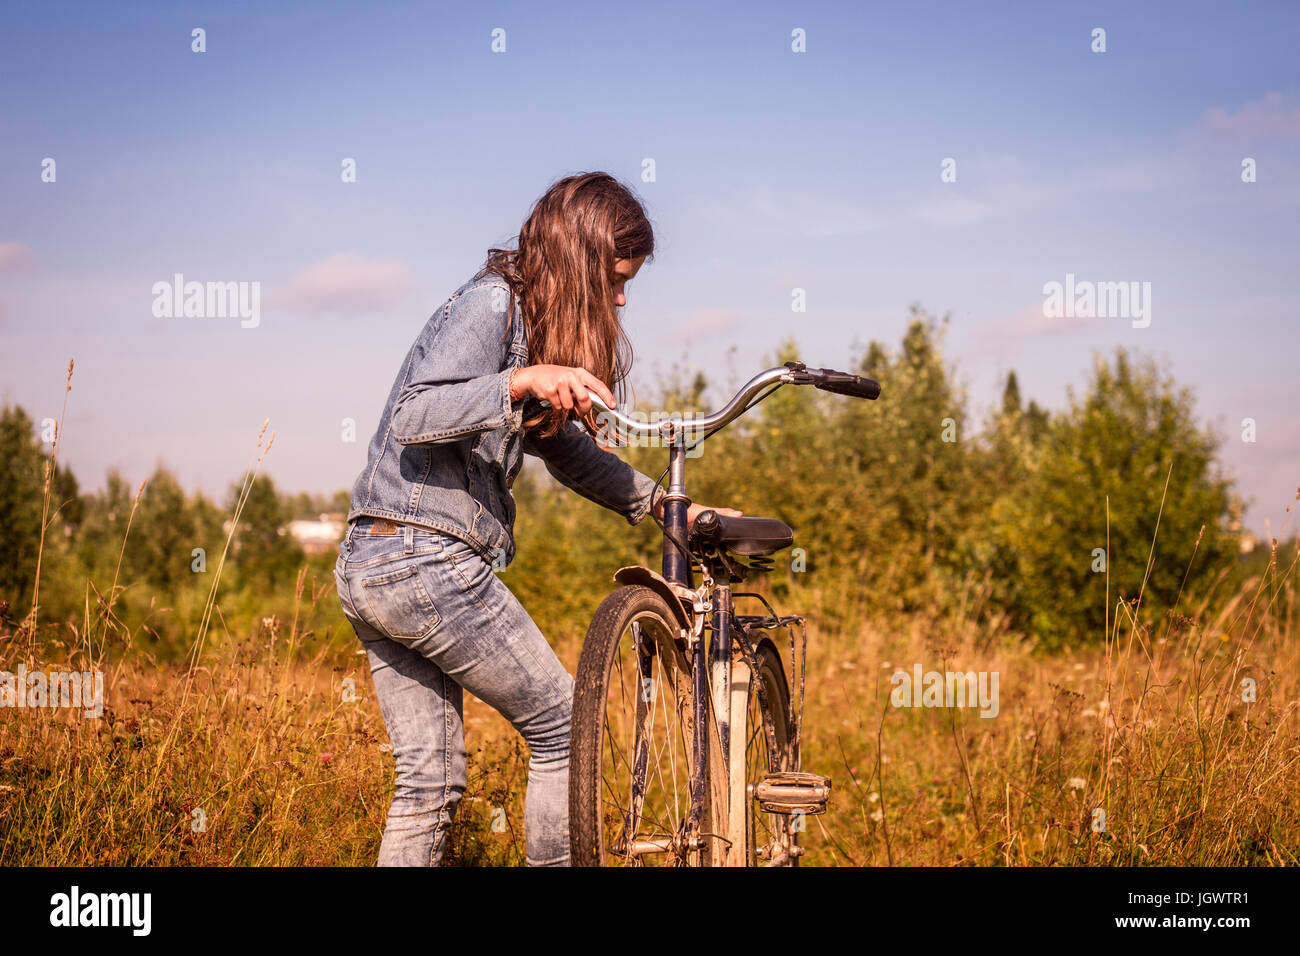 Teenage girl leaning mounting her bicycle in field Stock Photo